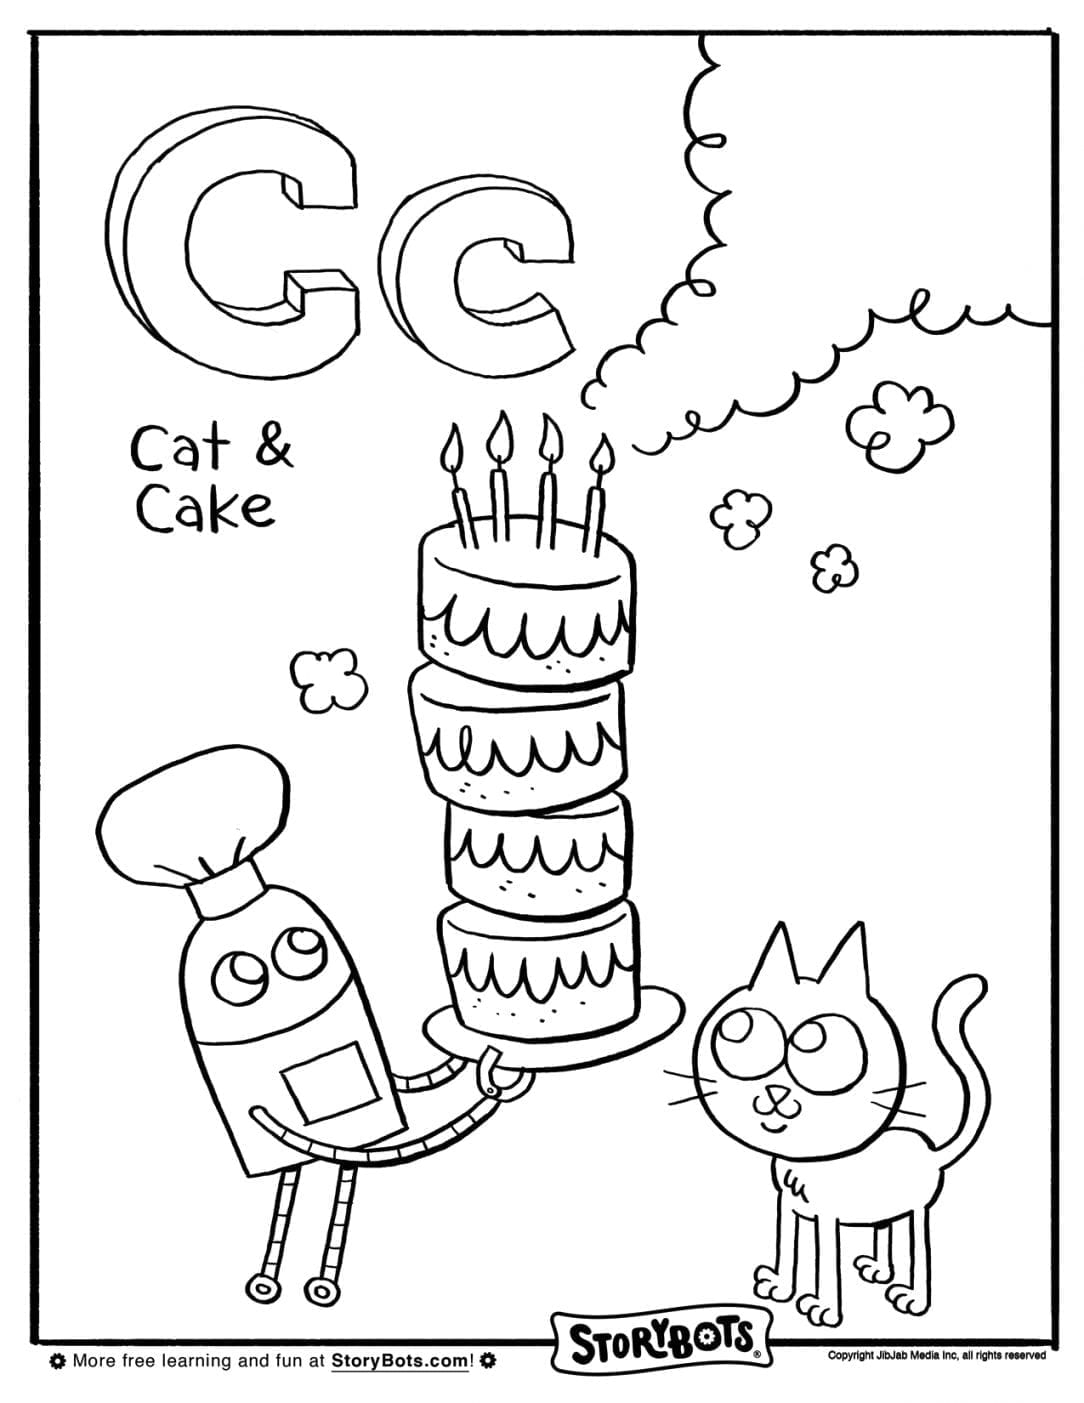 Letter C Coloring Pages For Preschoolers Letter C Coloring For Toddlers Preschool Sheet Pages Adults Free Cat